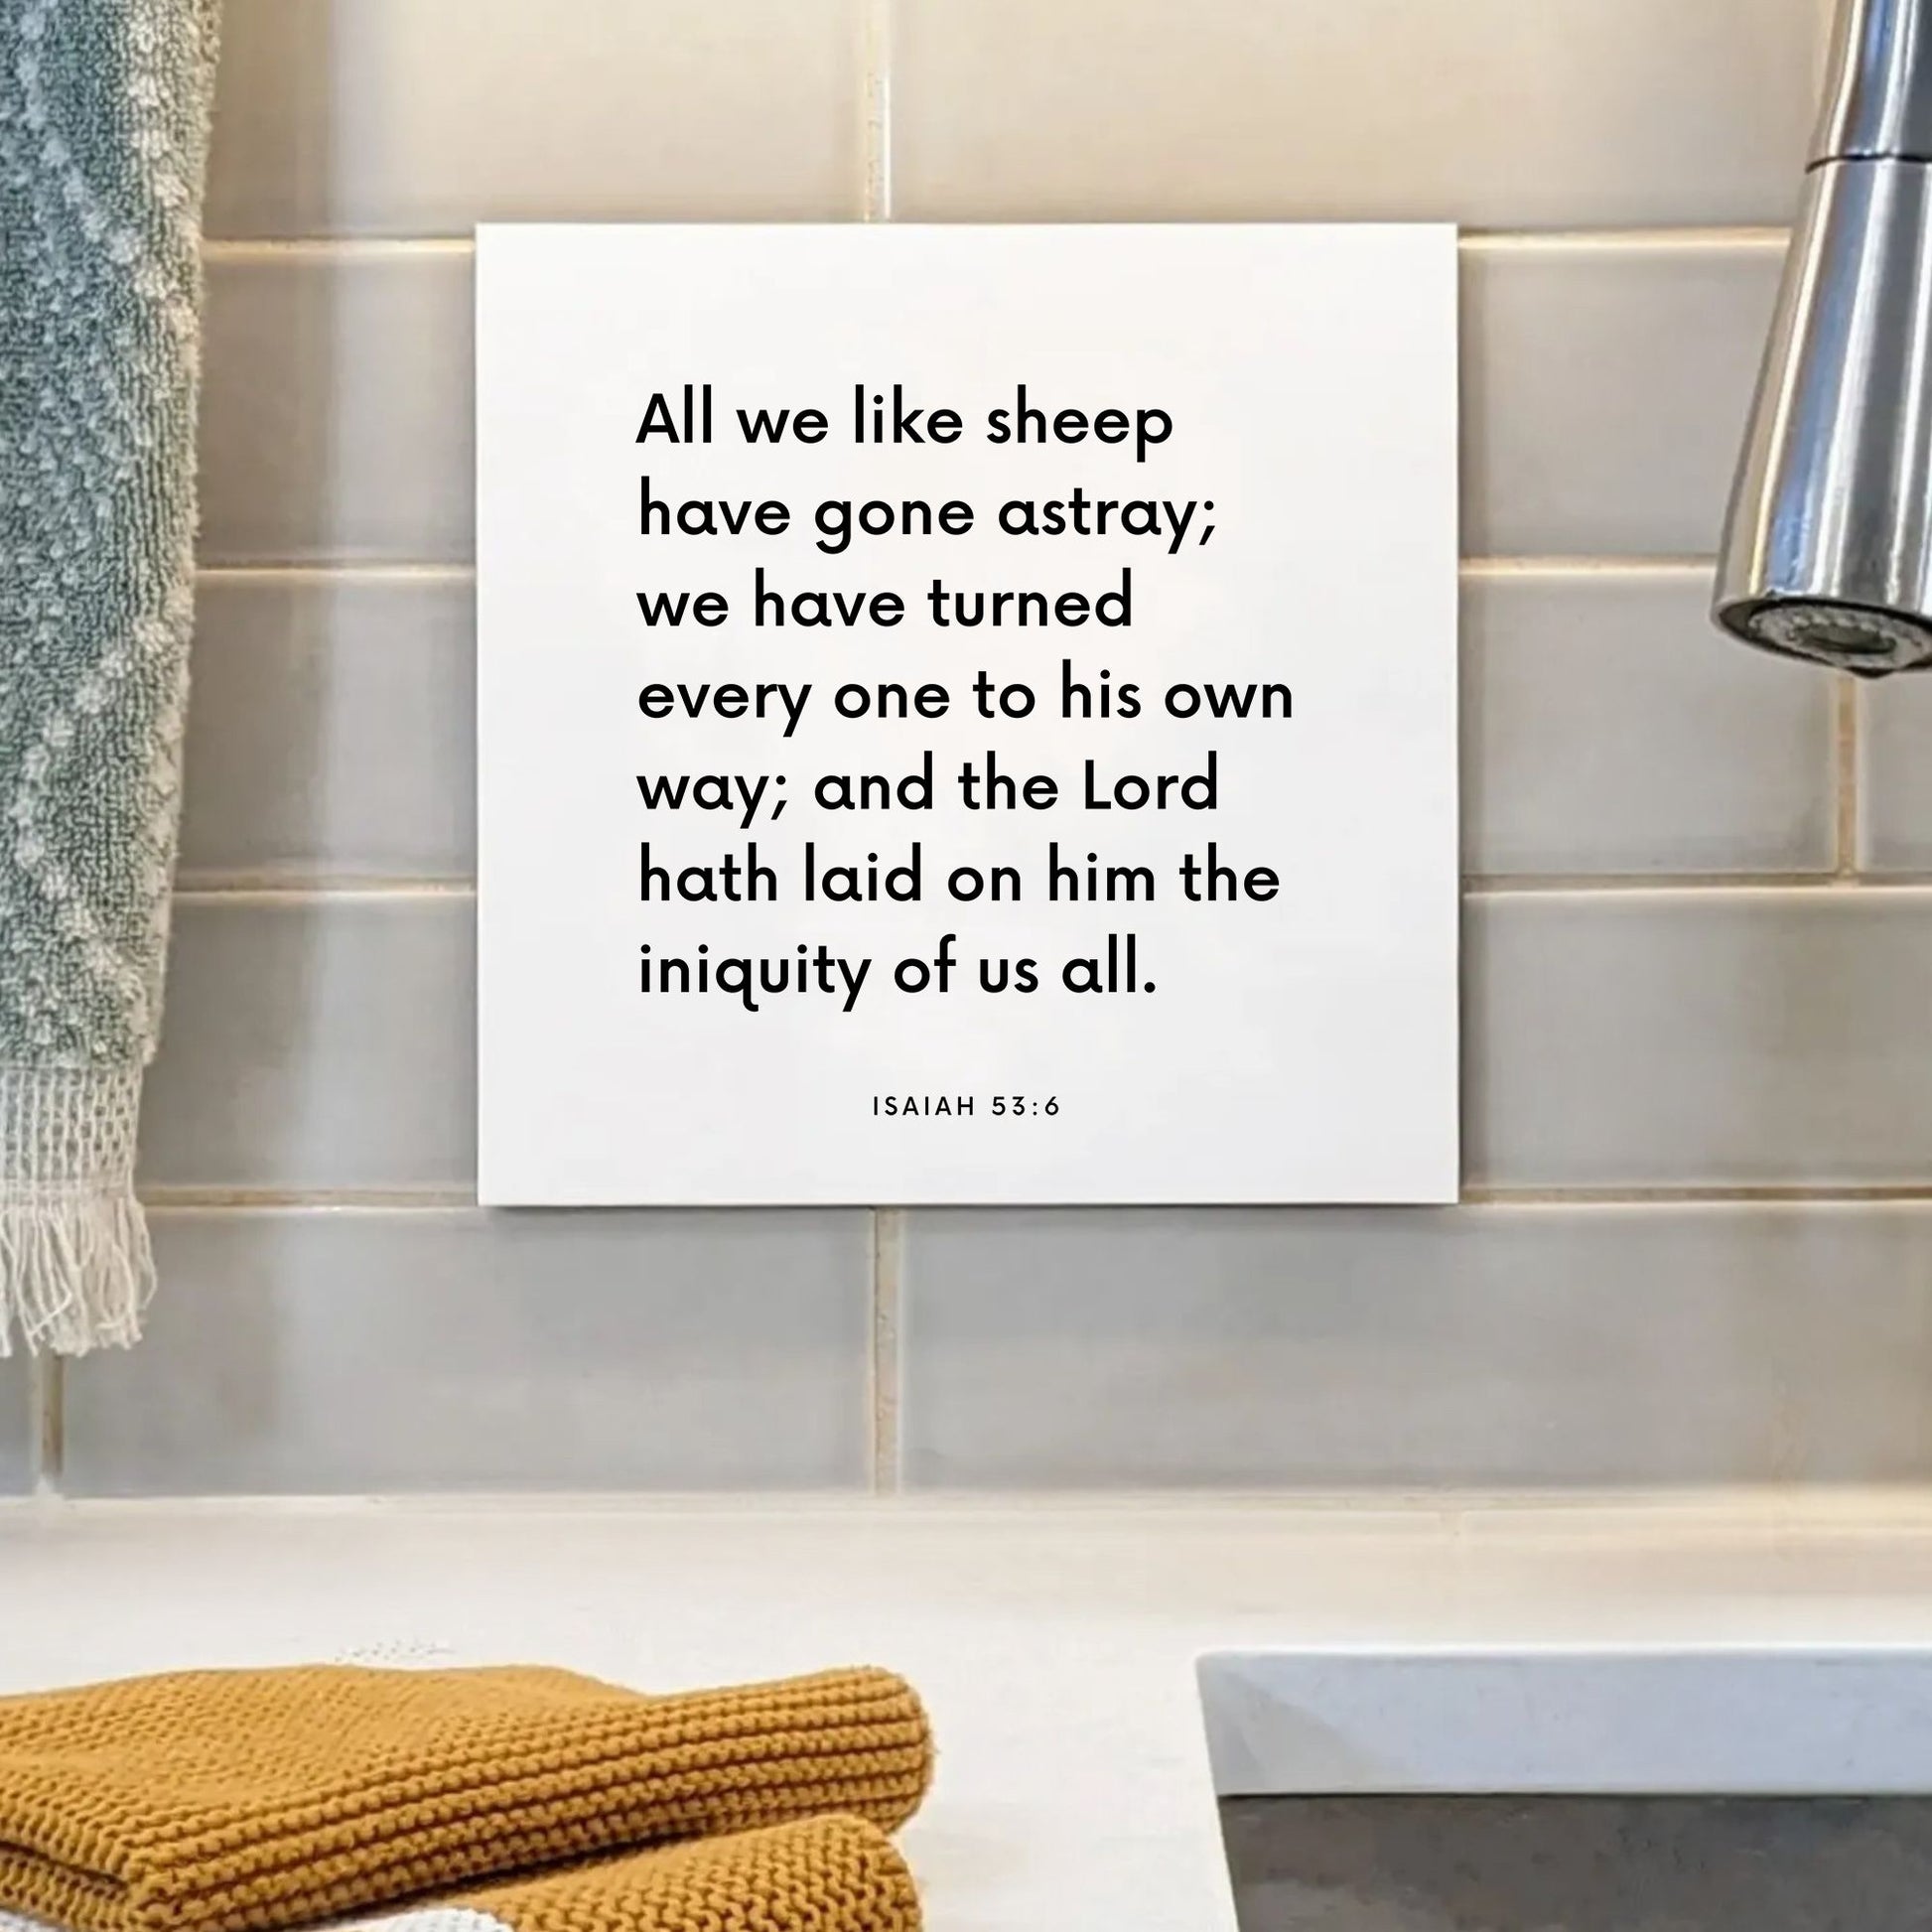 Sink mouting of the scripture tile for Isaiah 53:6 - "All we like sheep have gone astray"